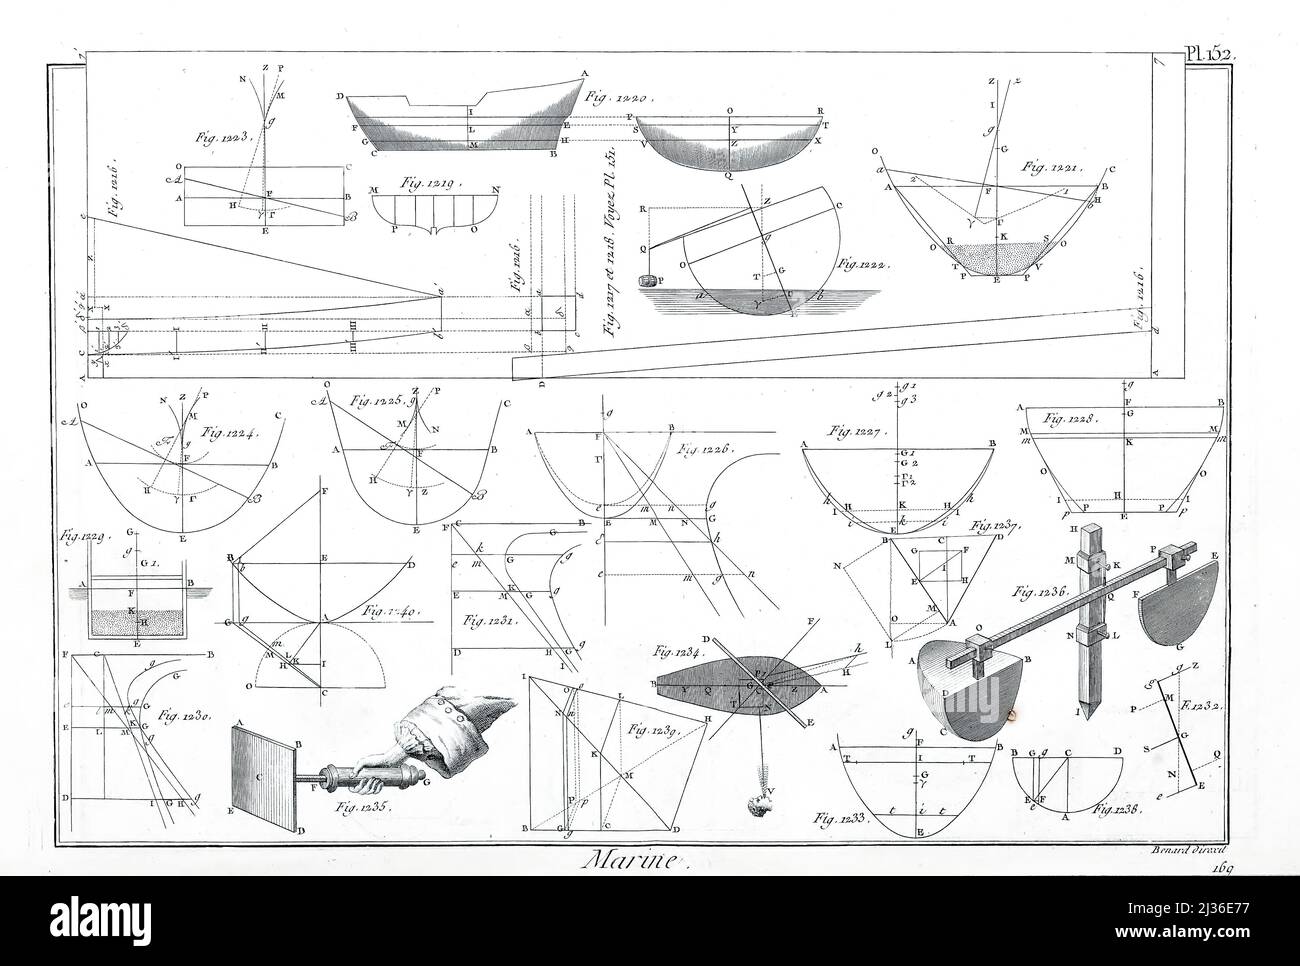 18th Century ships design From the Encyclopédie méthodique Maritime Encyclopedia Publisher Paris : Panckoucke ; Liège : Plomteux in 1787 containing drawings and blueprints of shipbuilding,  and Illustrations of maritime subjects plates drawn by Benard direxit Stock Photo